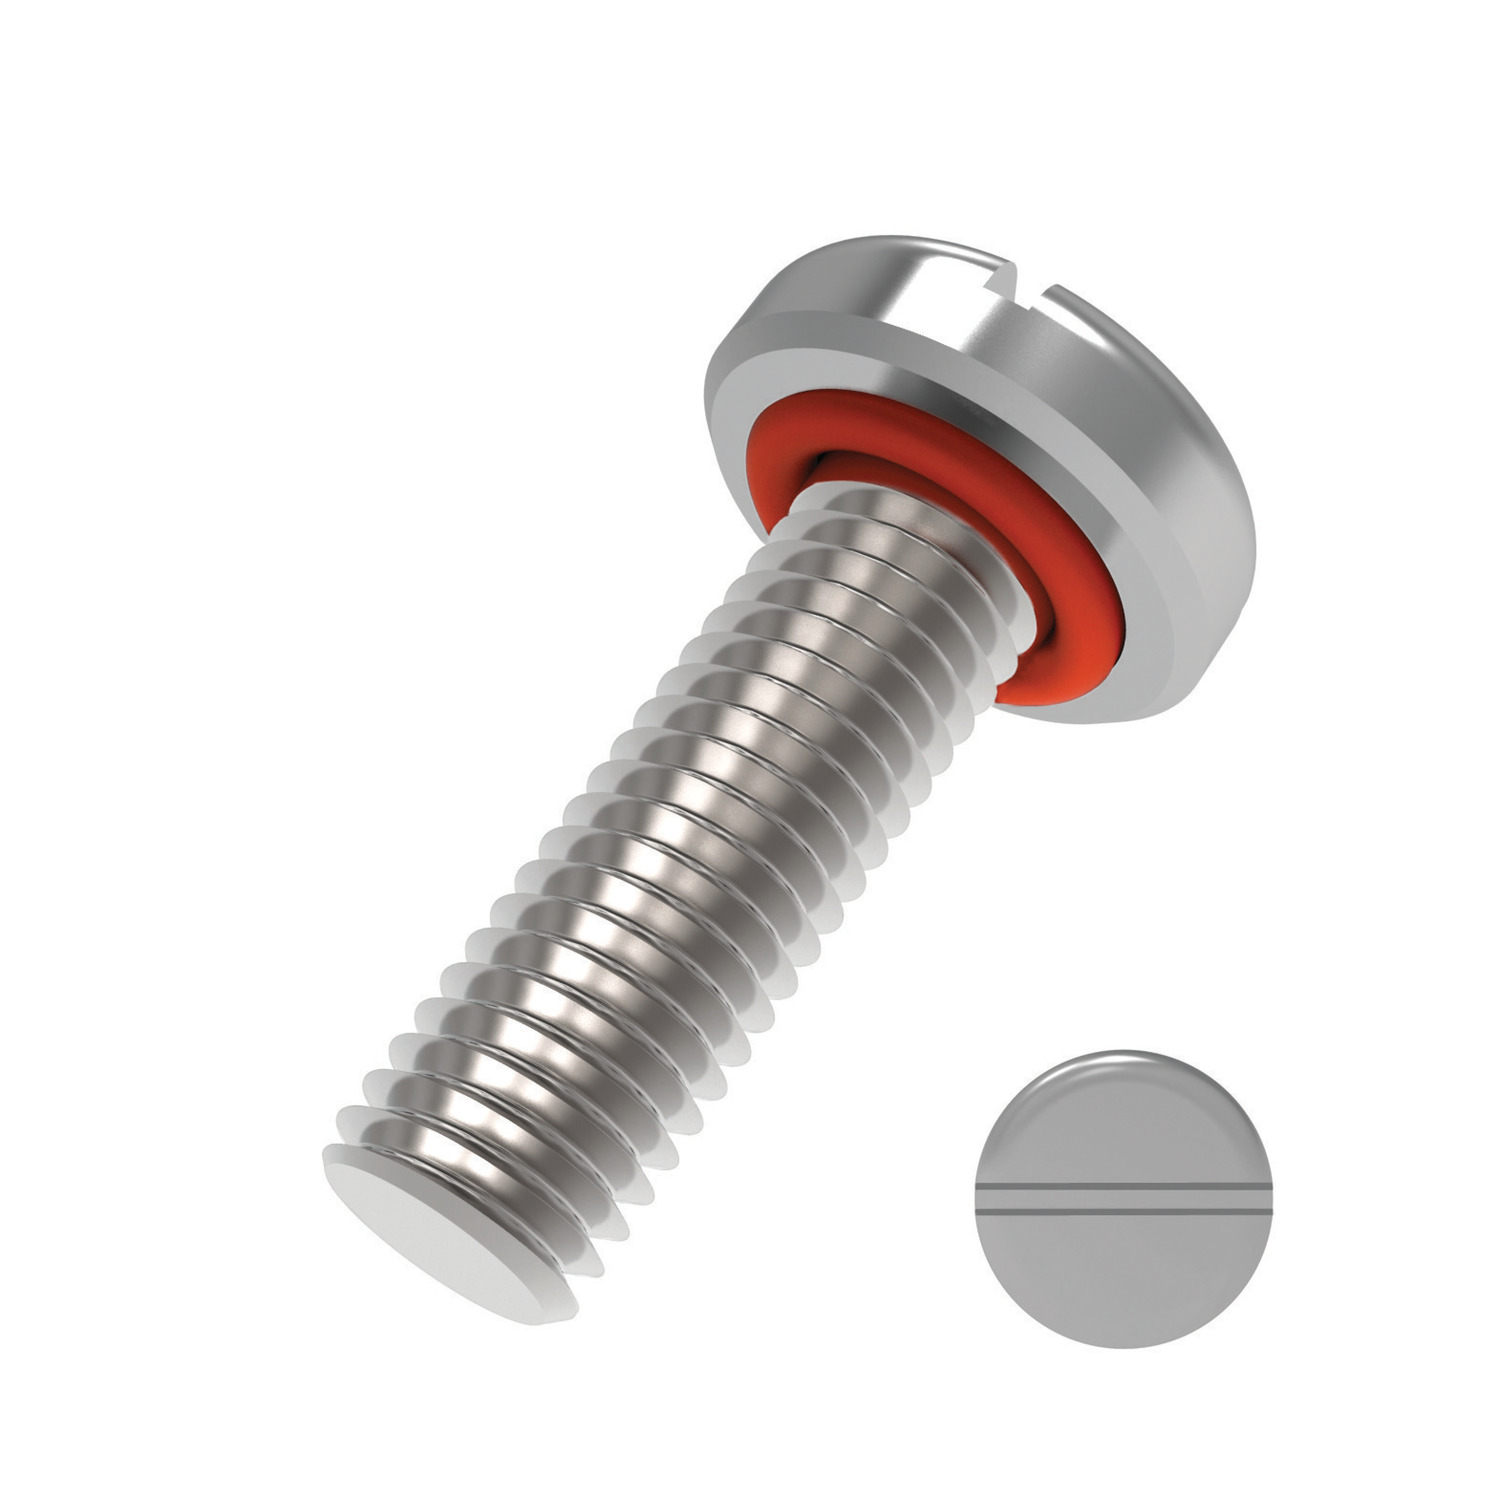 Pan Head Seal Screws Self-sealing screws, pan head slotted with integral O ring groove to seal liquids and gases out and in. M2 to M10 A2 or A4 stainless steel.